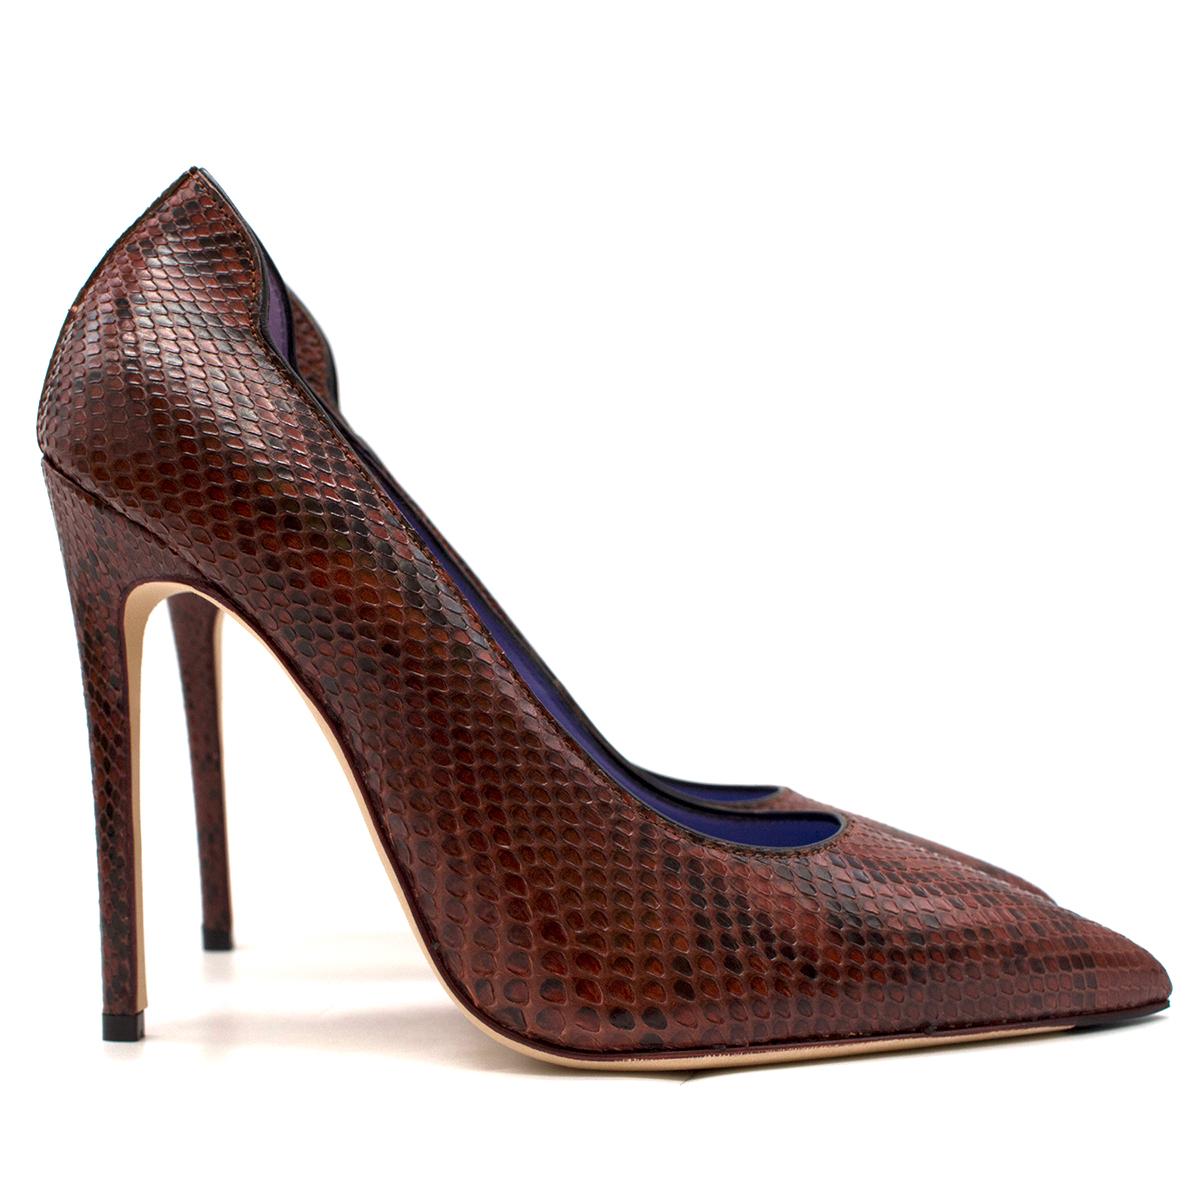 Victoria Beckham Burgundy Python Pumps

- One of a kind
- Burgundy python pumps
- Slip-on style
- Pointed toe
- 110cm stiletto heel
- Purple leather lining with logo embossed
- This item comes with the original dust bag and shoe box.

Please note,